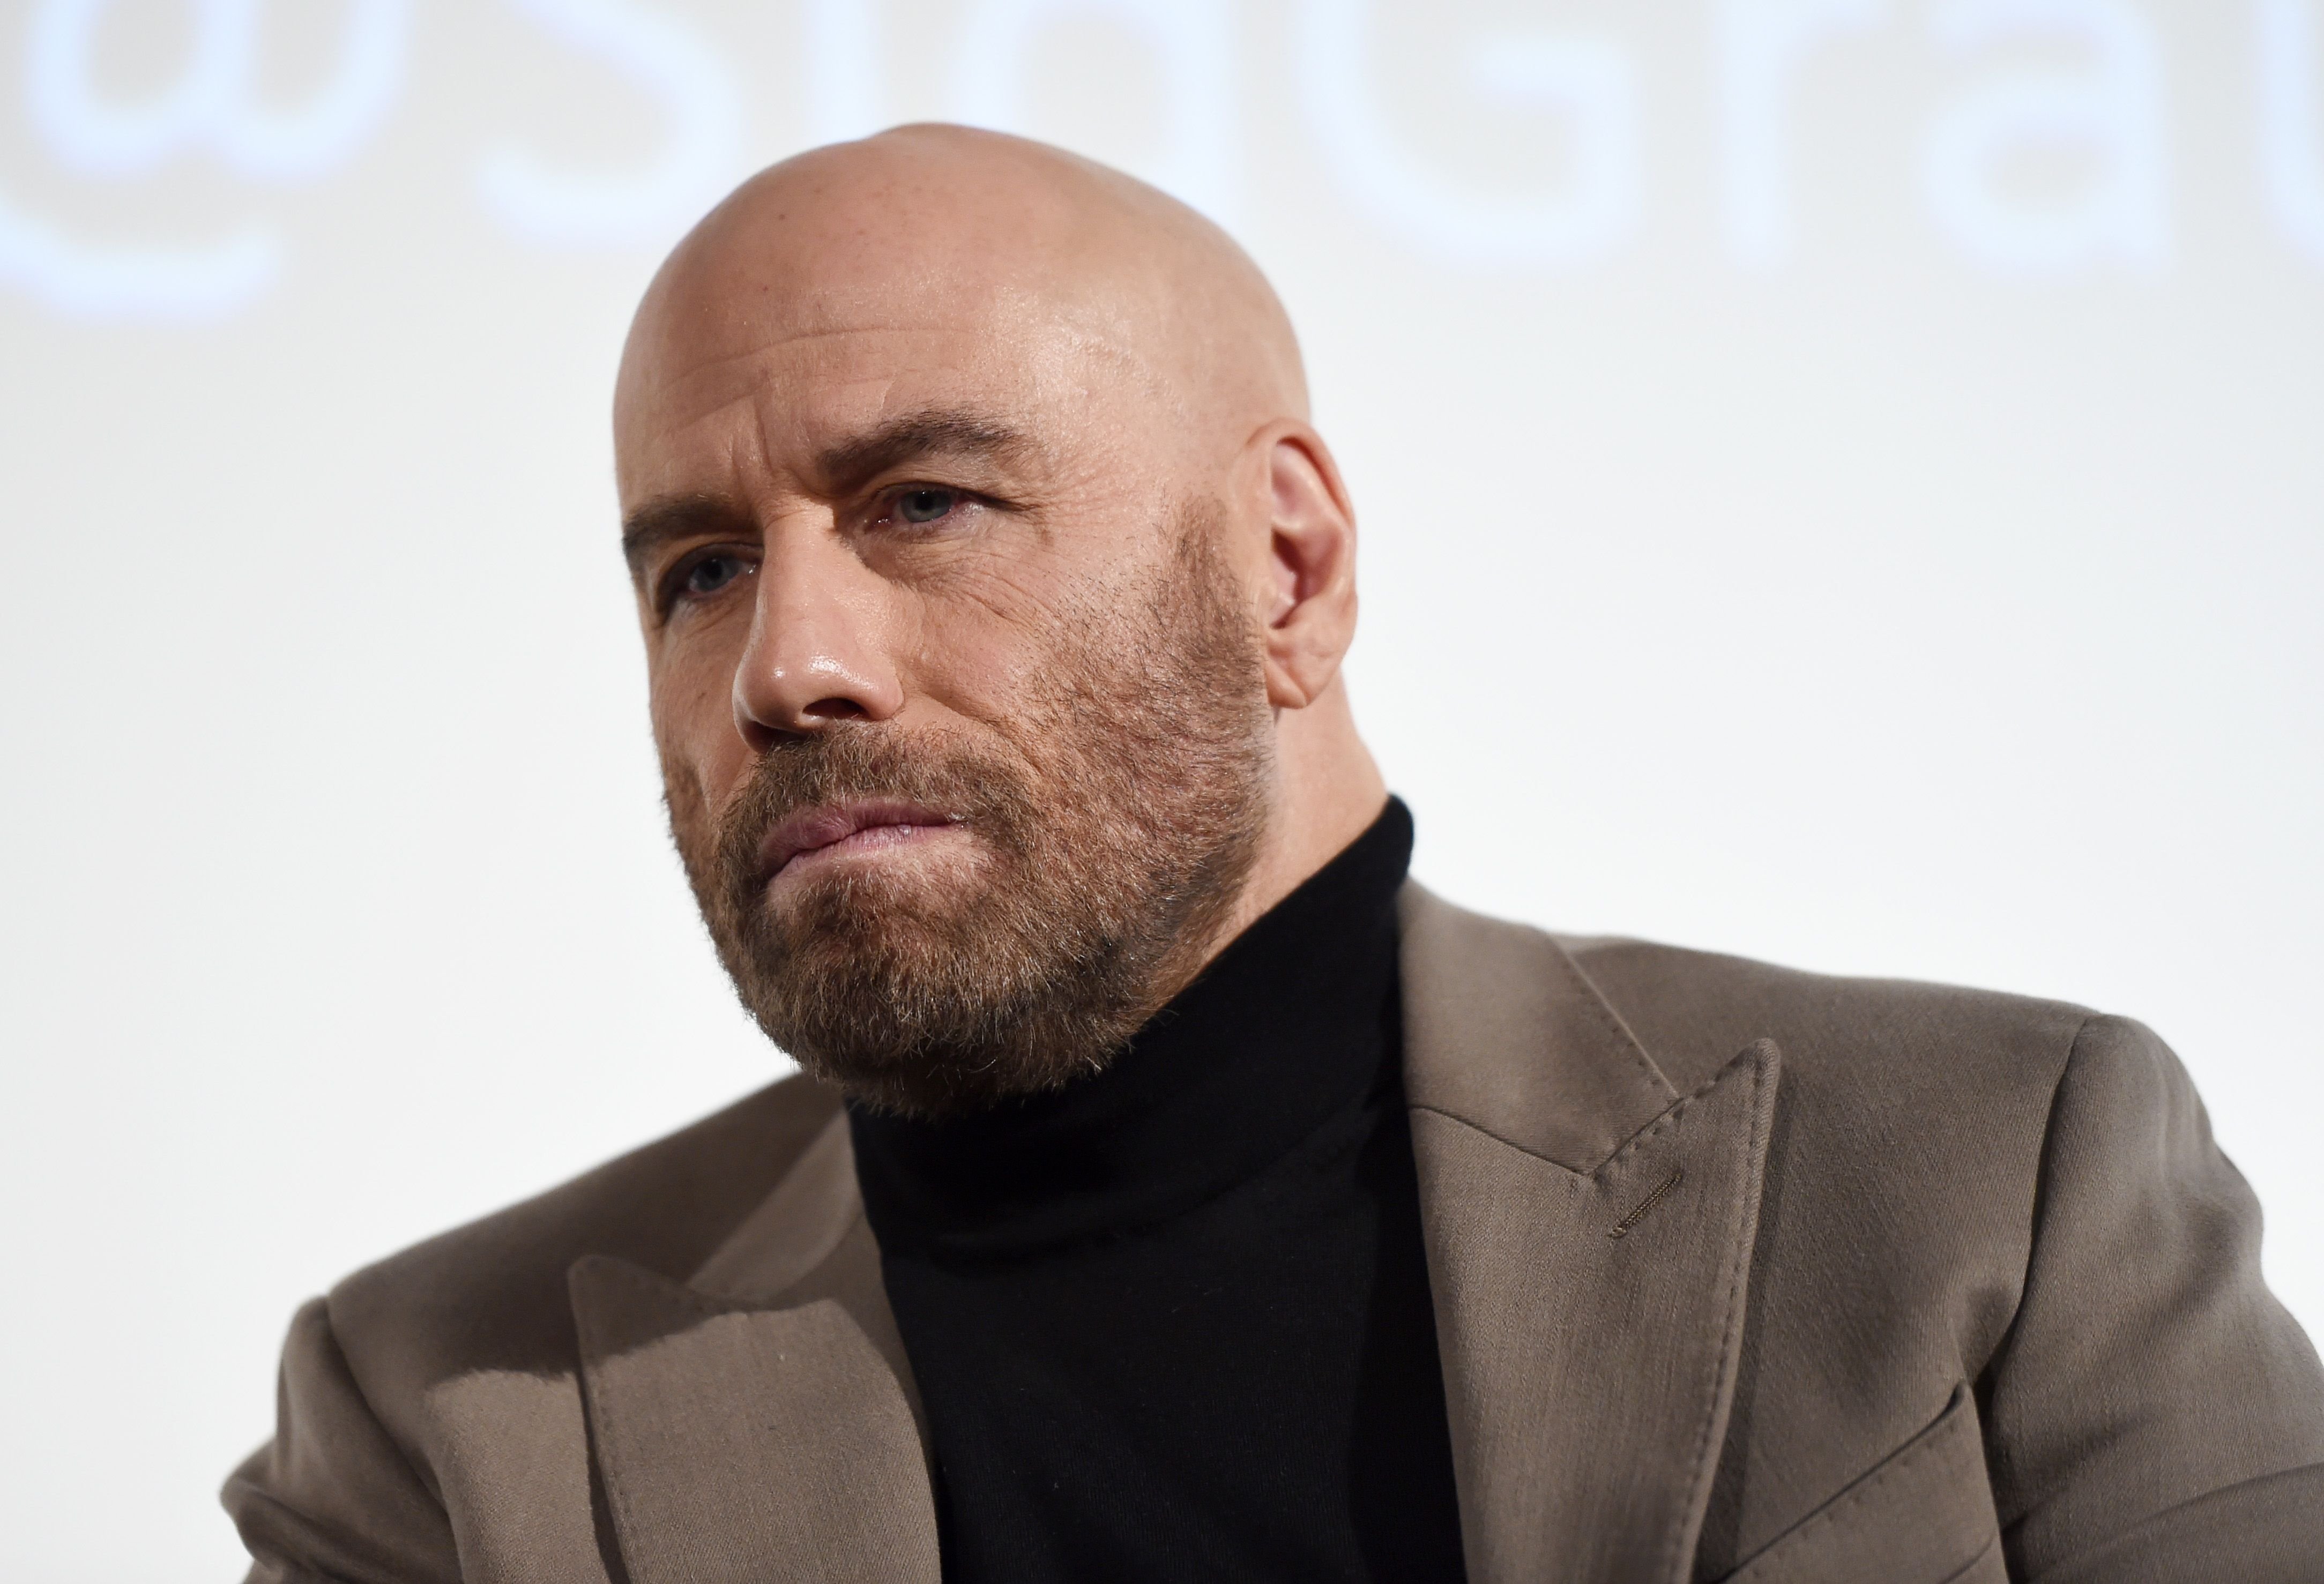 John Travolta at an American Cinematheque event on January 04, 2020 | Photo: Getty Images